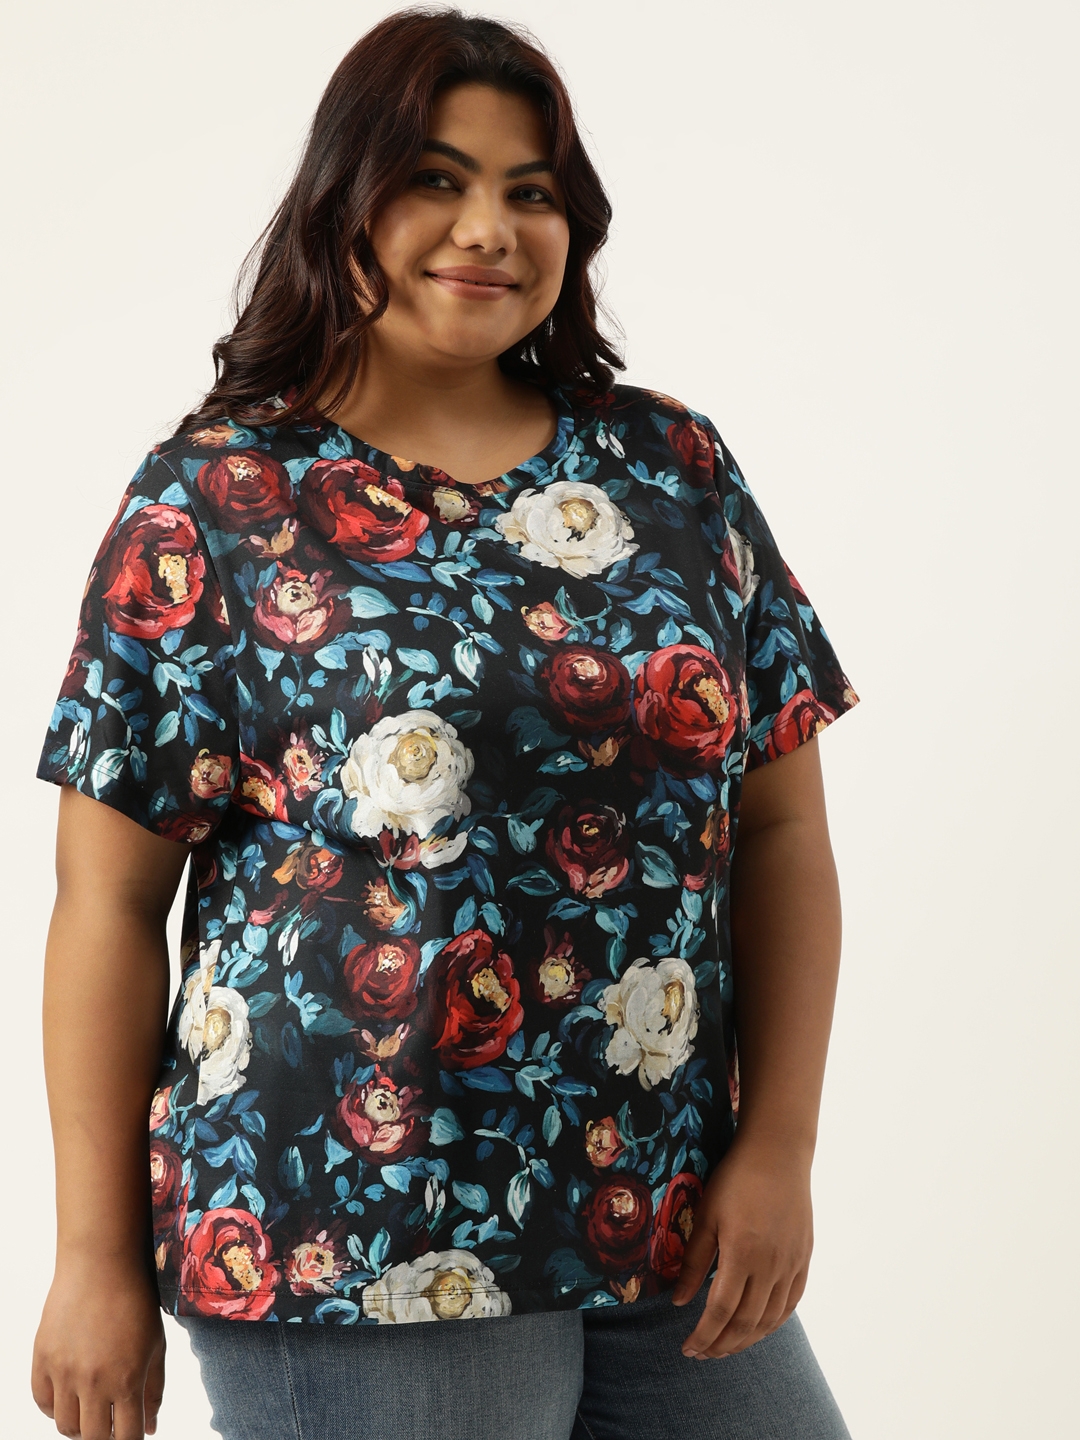 Plus Size Black All Over Printed Round Neck Bio Wash tshirt For women